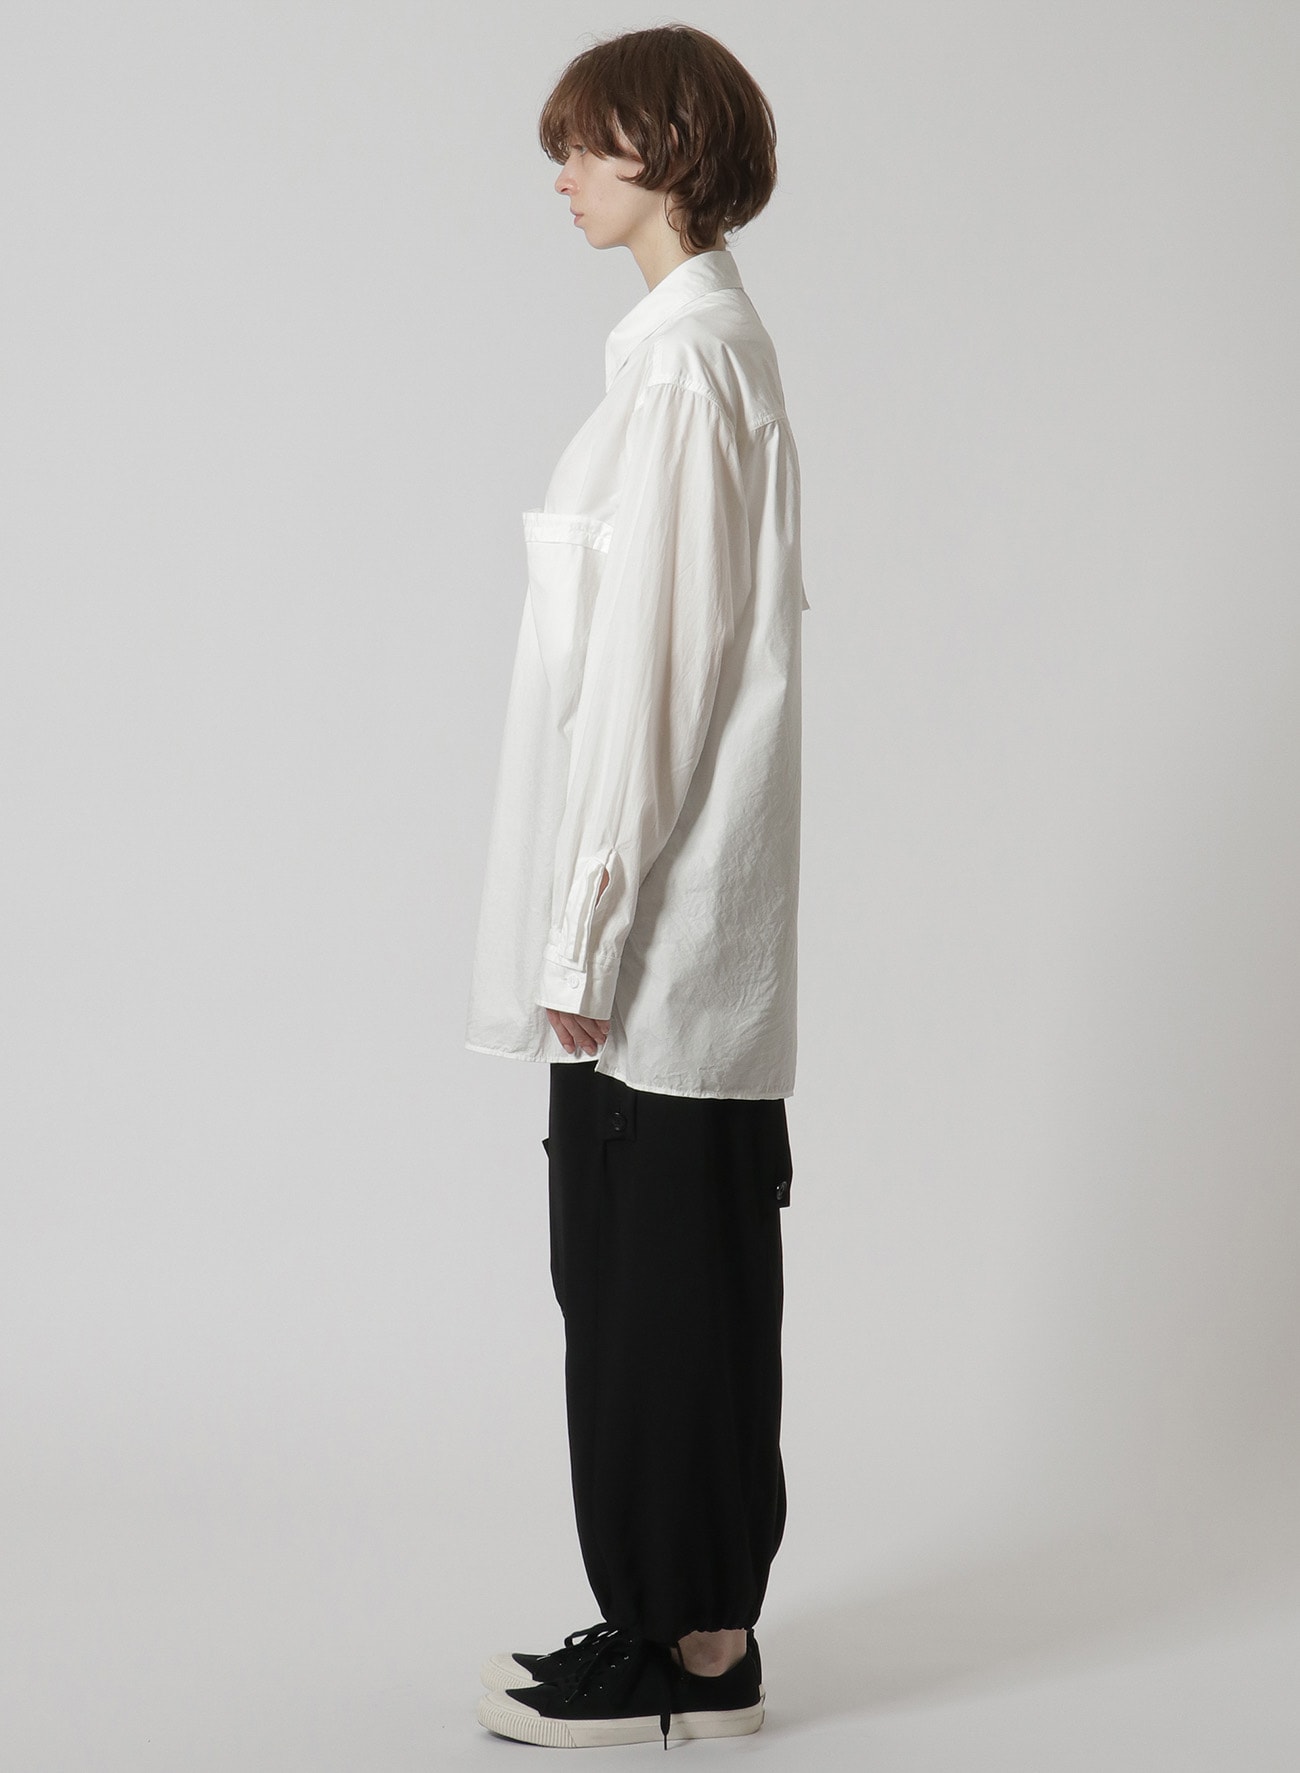 Y's-Black Name]COTTON TAPE FLAP POCKET SHIRT(S White): Y's｜THE